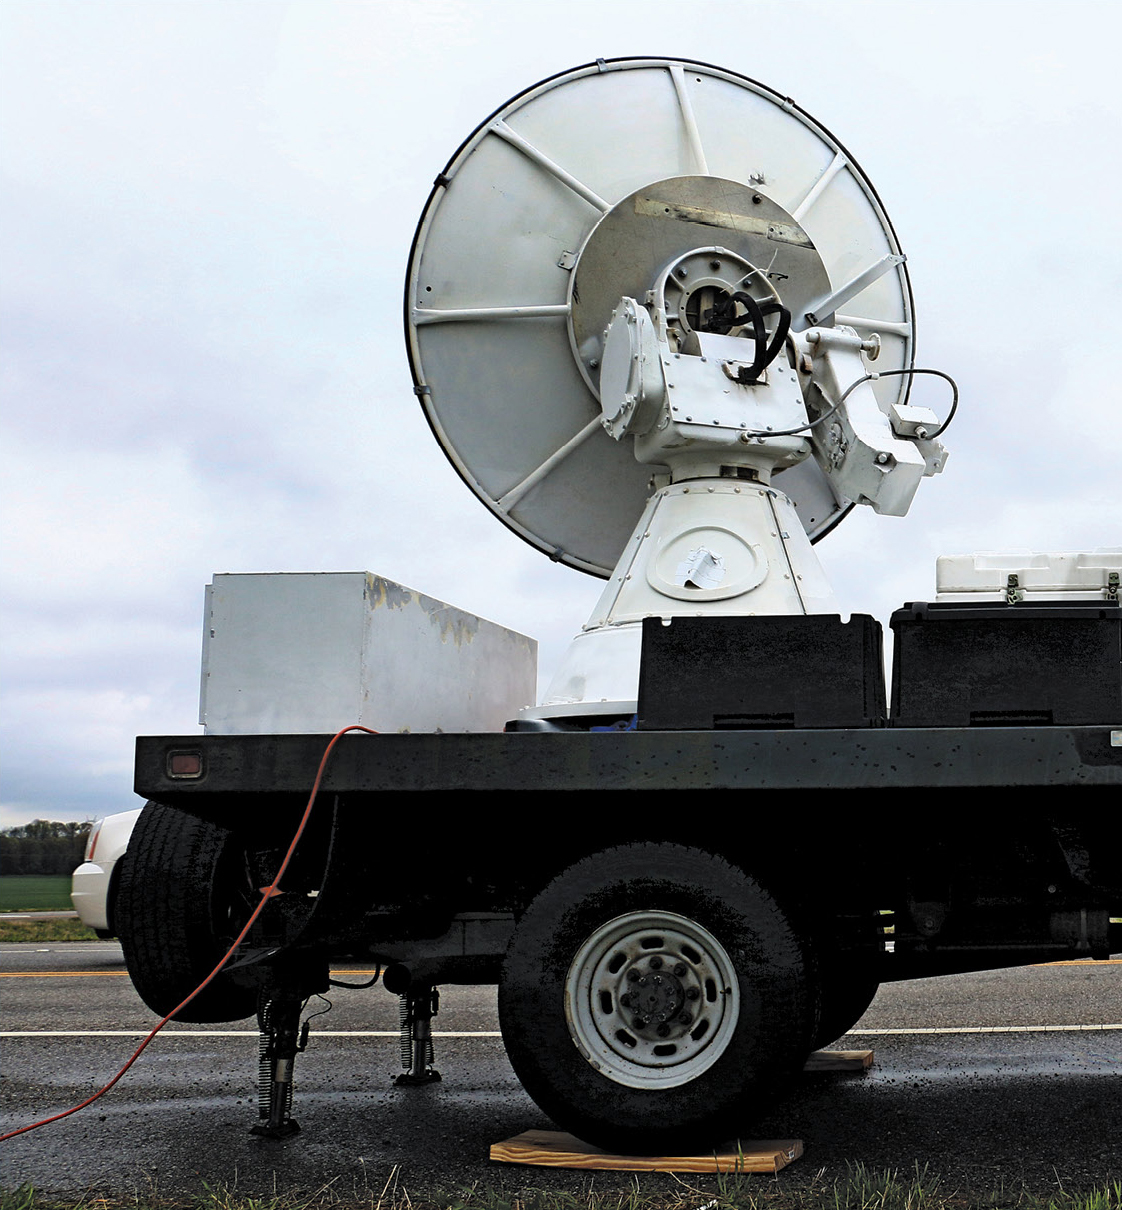 Robin and her team get the radar truck parked and ready to scan for storms - photo 2